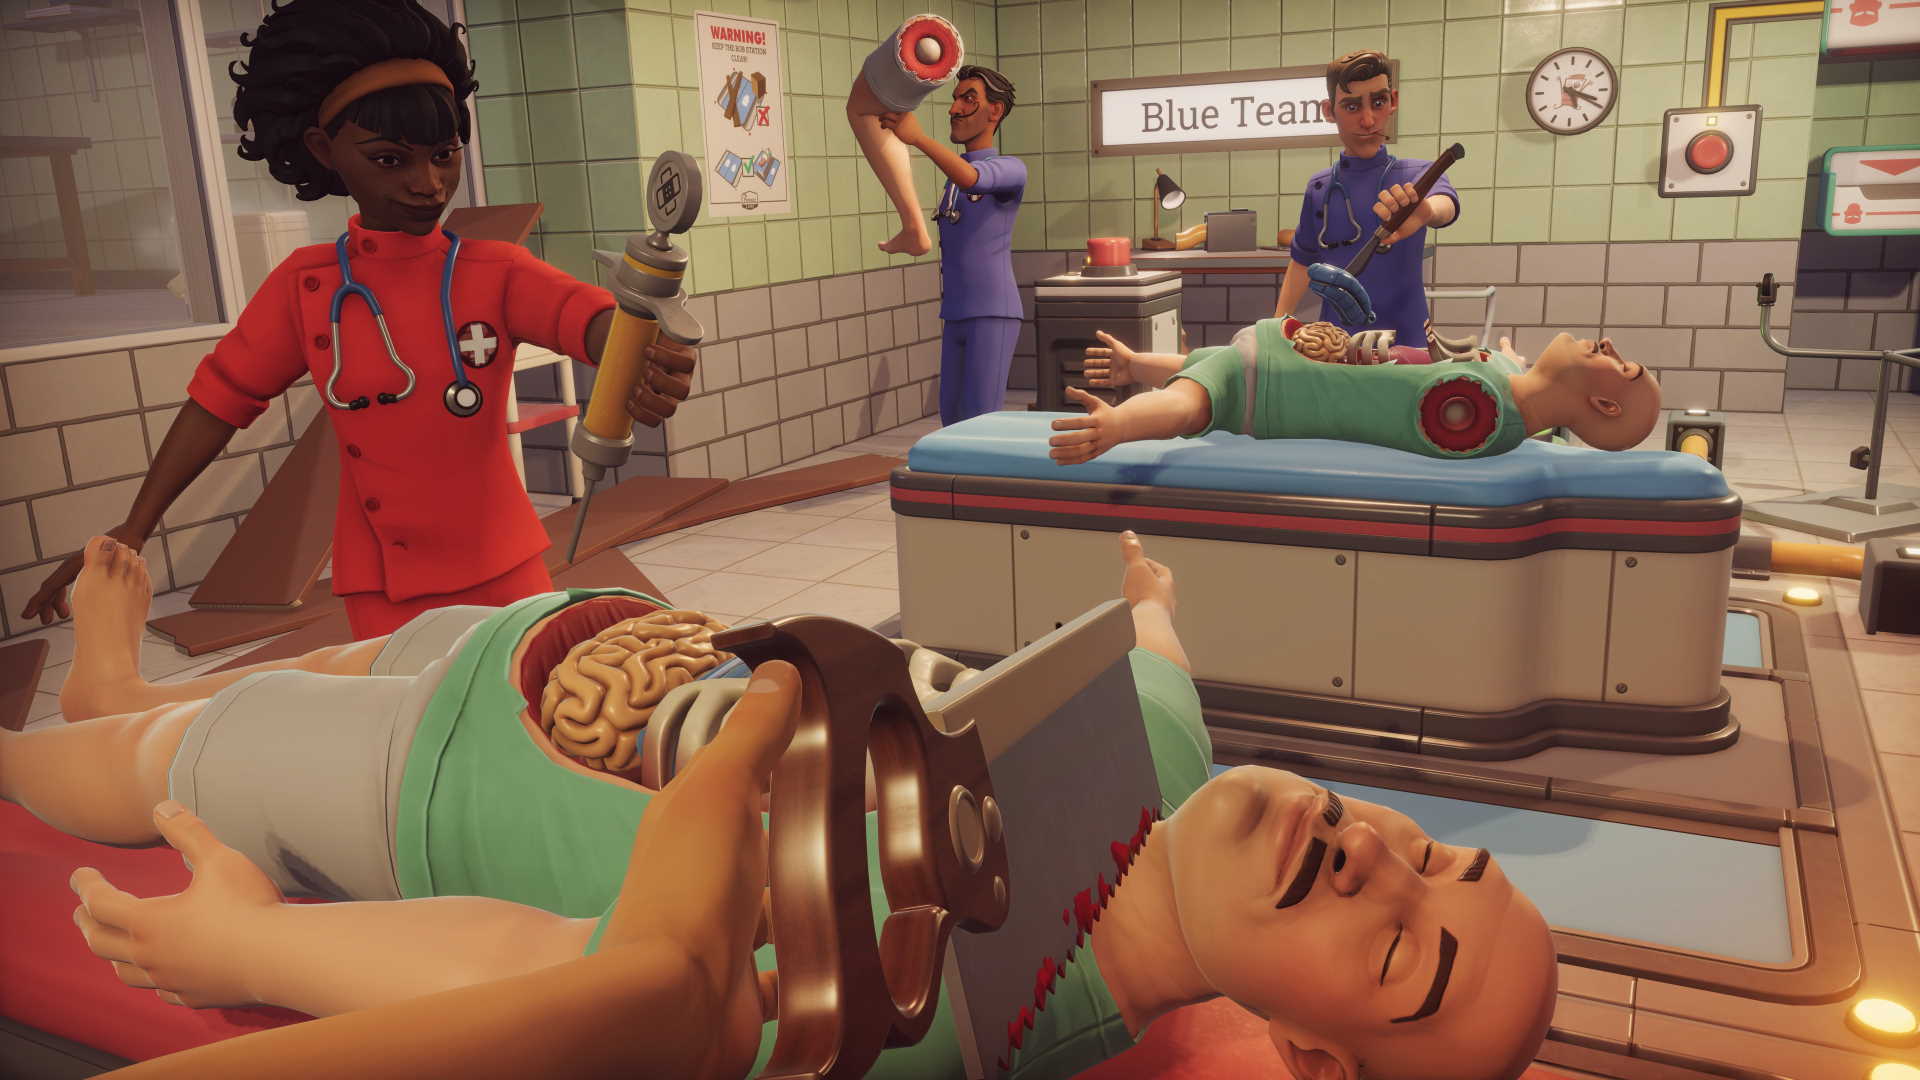 Surgeon Simulator 2: Access All Areas is Coming Soon to Xbox Game